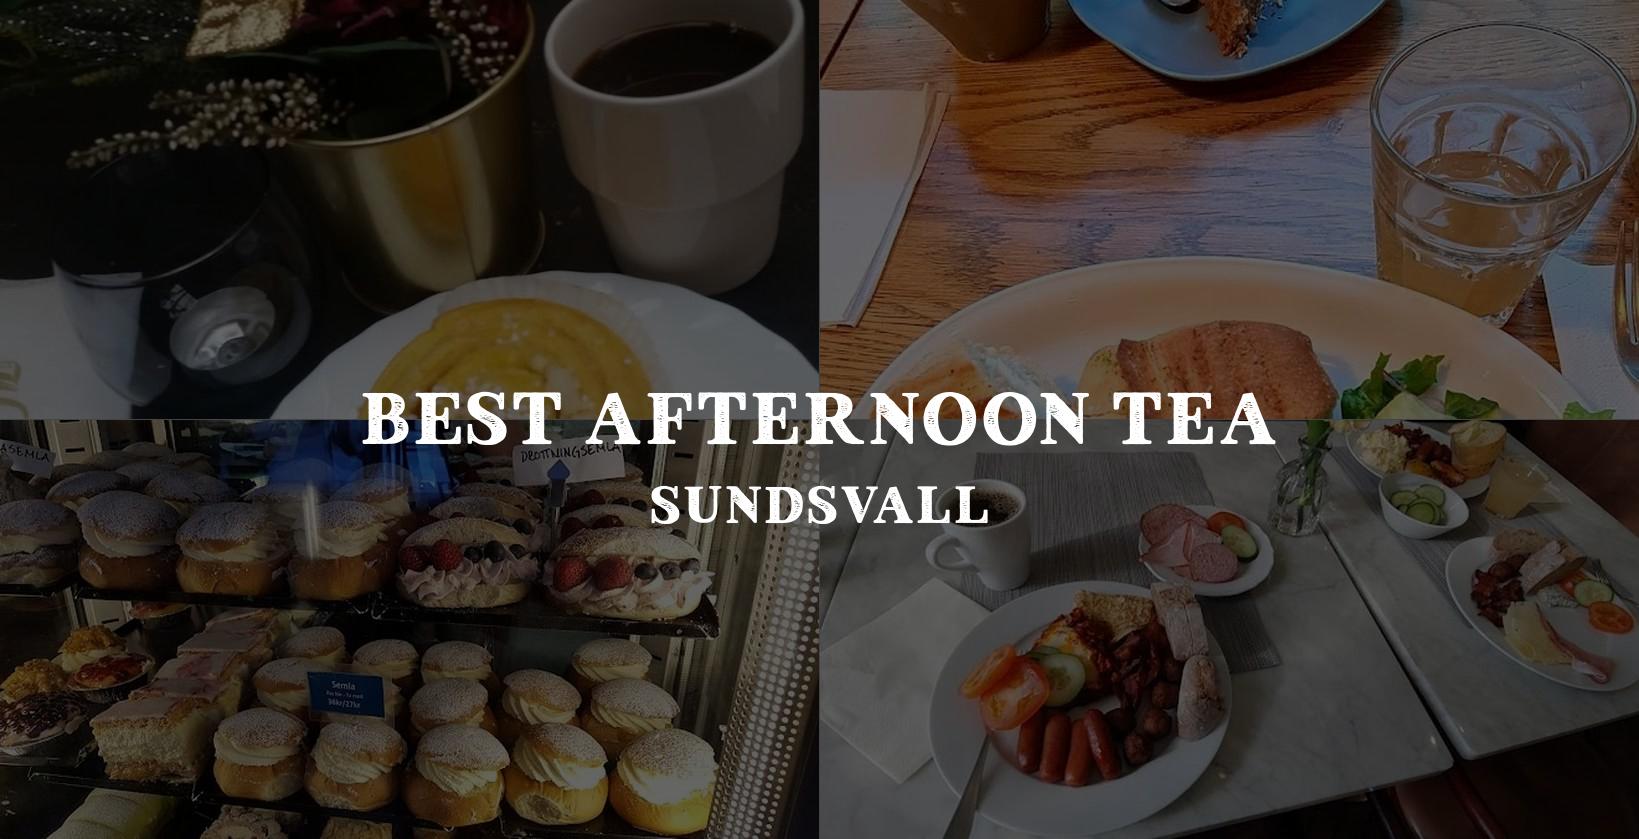 Choosing the perfect spot for afternoon tea in Sundsvall